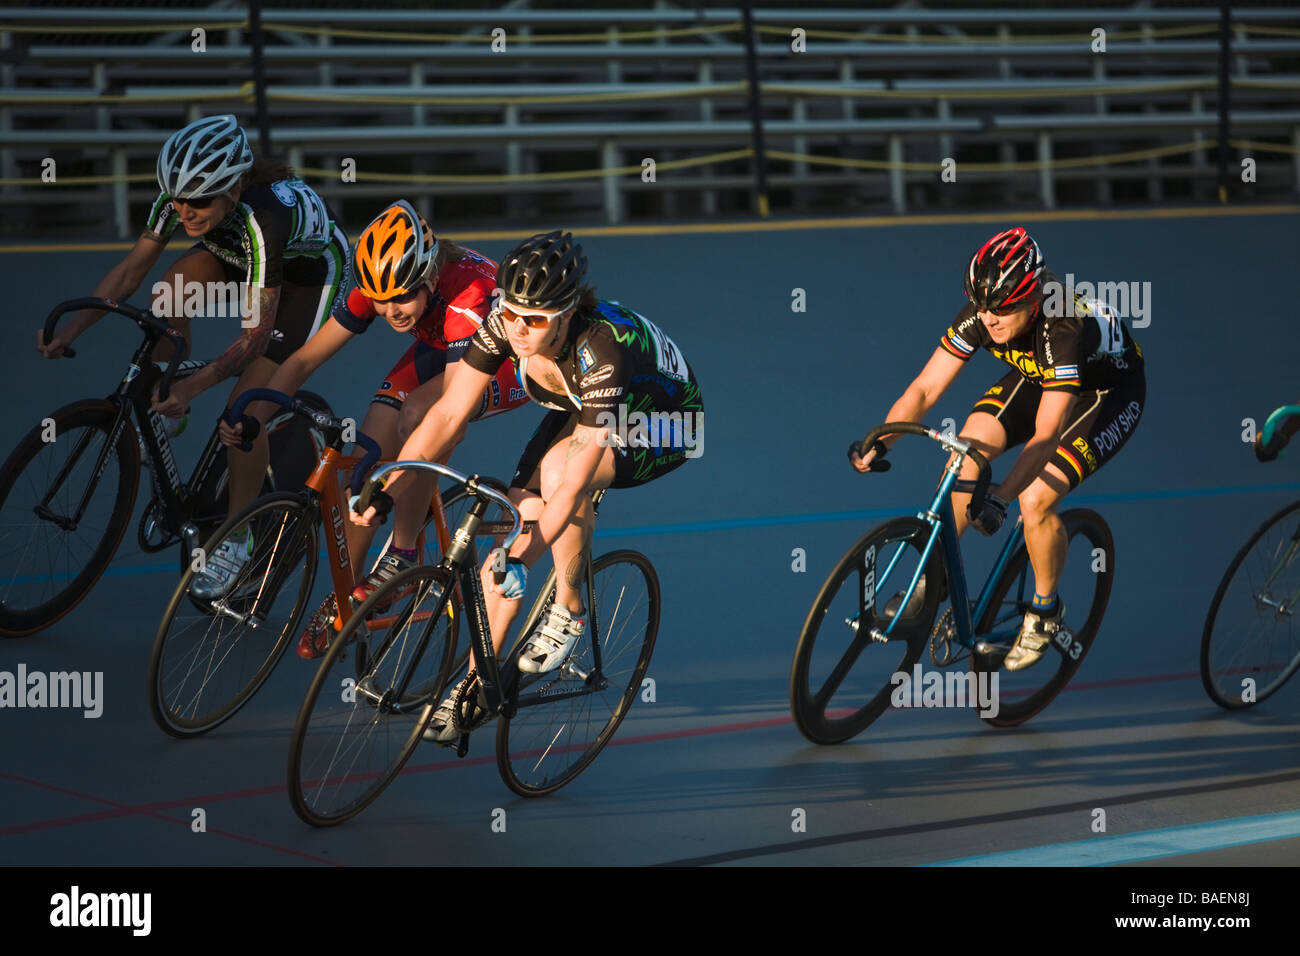 ILLINOIS Northbrook Group of women cyclists on curve in bicycle race at velodrome track Stock Photo